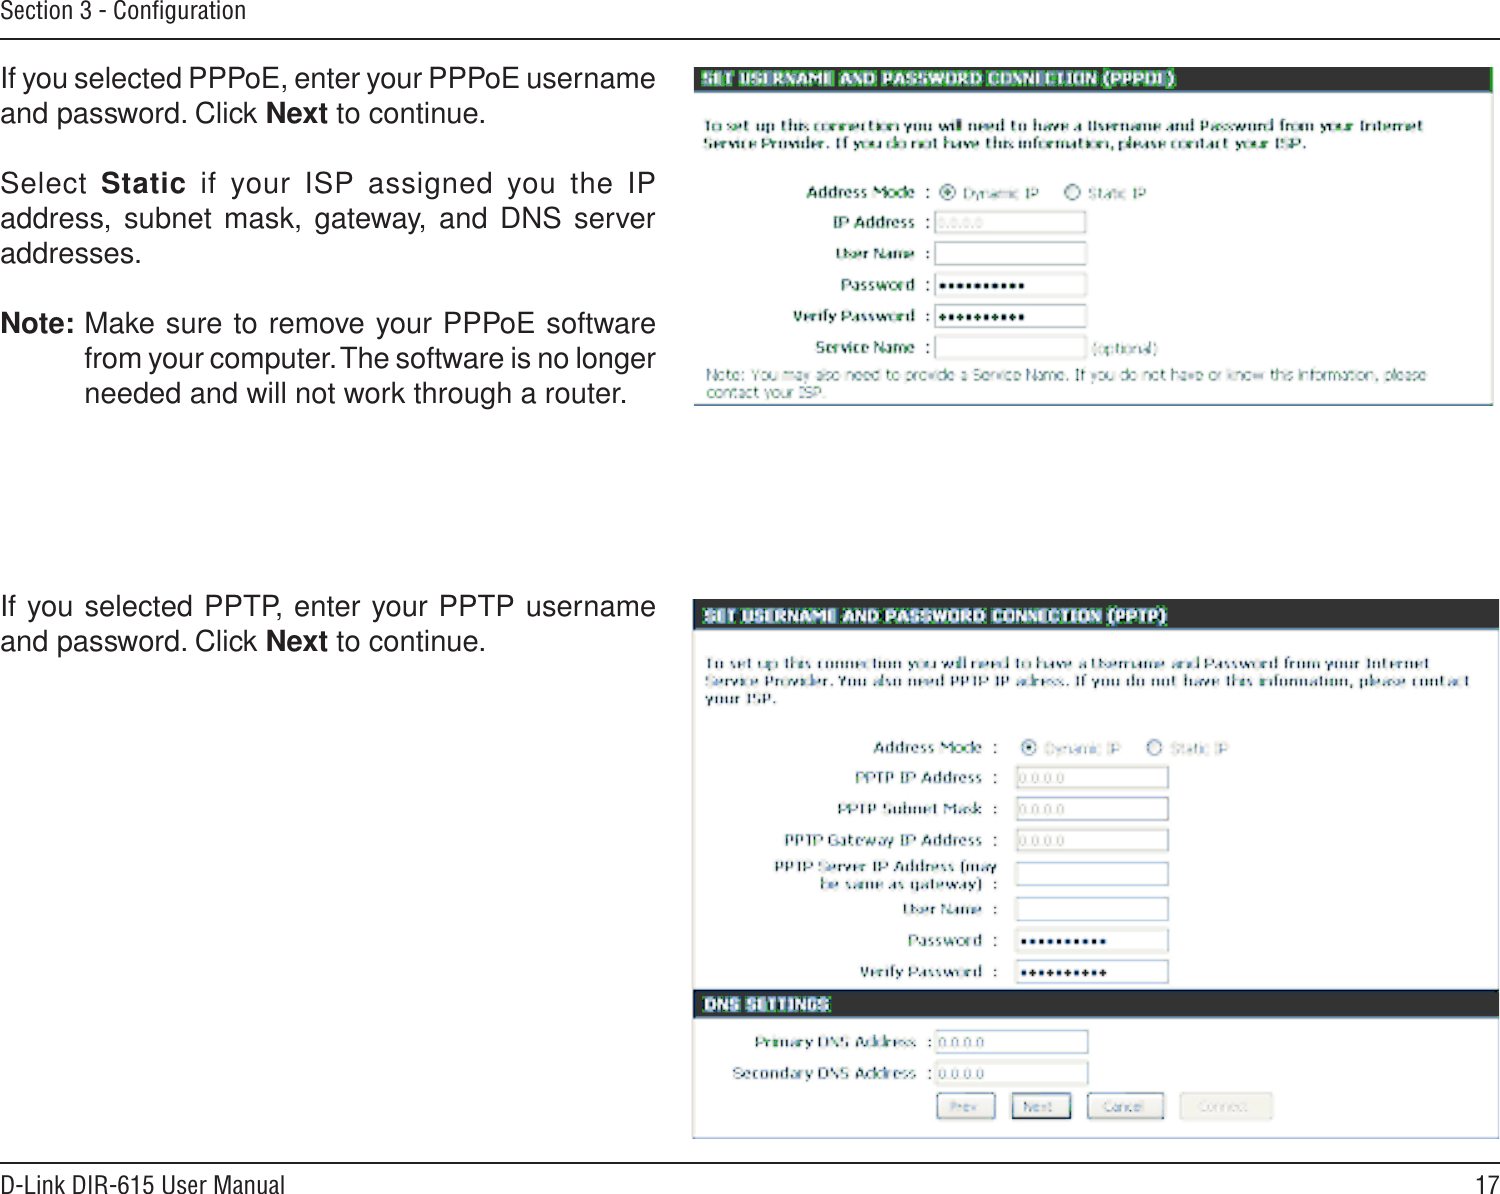 17D-Link DIR-615 User ManualSection 3 - ConﬁgurationIf you selected PPTP, enter your PPTP username and password. Click Next to continue.If you selected PPPoE, enter your PPPoE username and password. Click Next to continue.Select  Static  if  your  ISP  assigned  you  the  IP address, subnet mask,  gateway, and DNS server addresses.Note: Make sure to remove your PPPoE software from your computer. The software is no longer needed and will not work through a router.